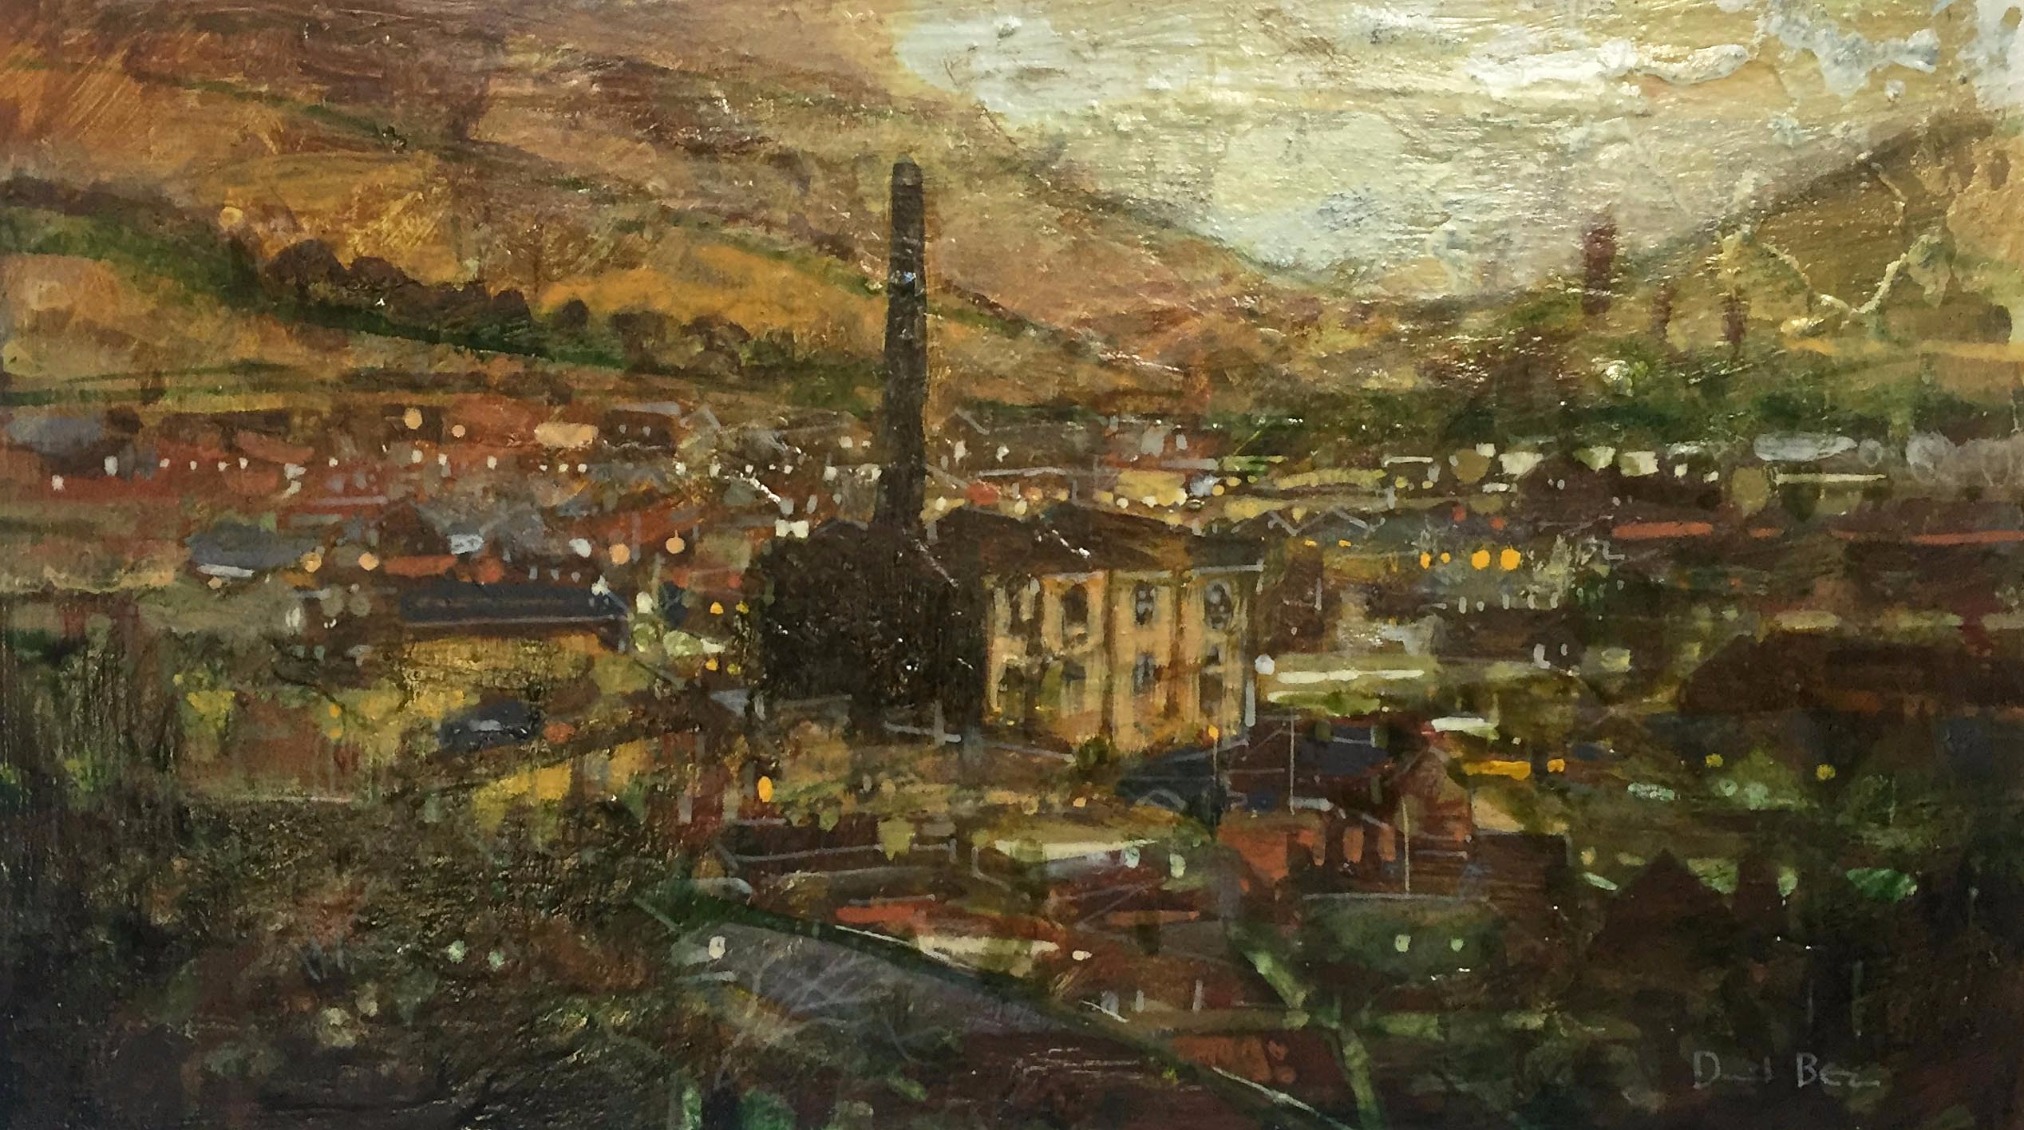 Heart of the Community by David Bez, Landscape | Northern | Industrial | Local